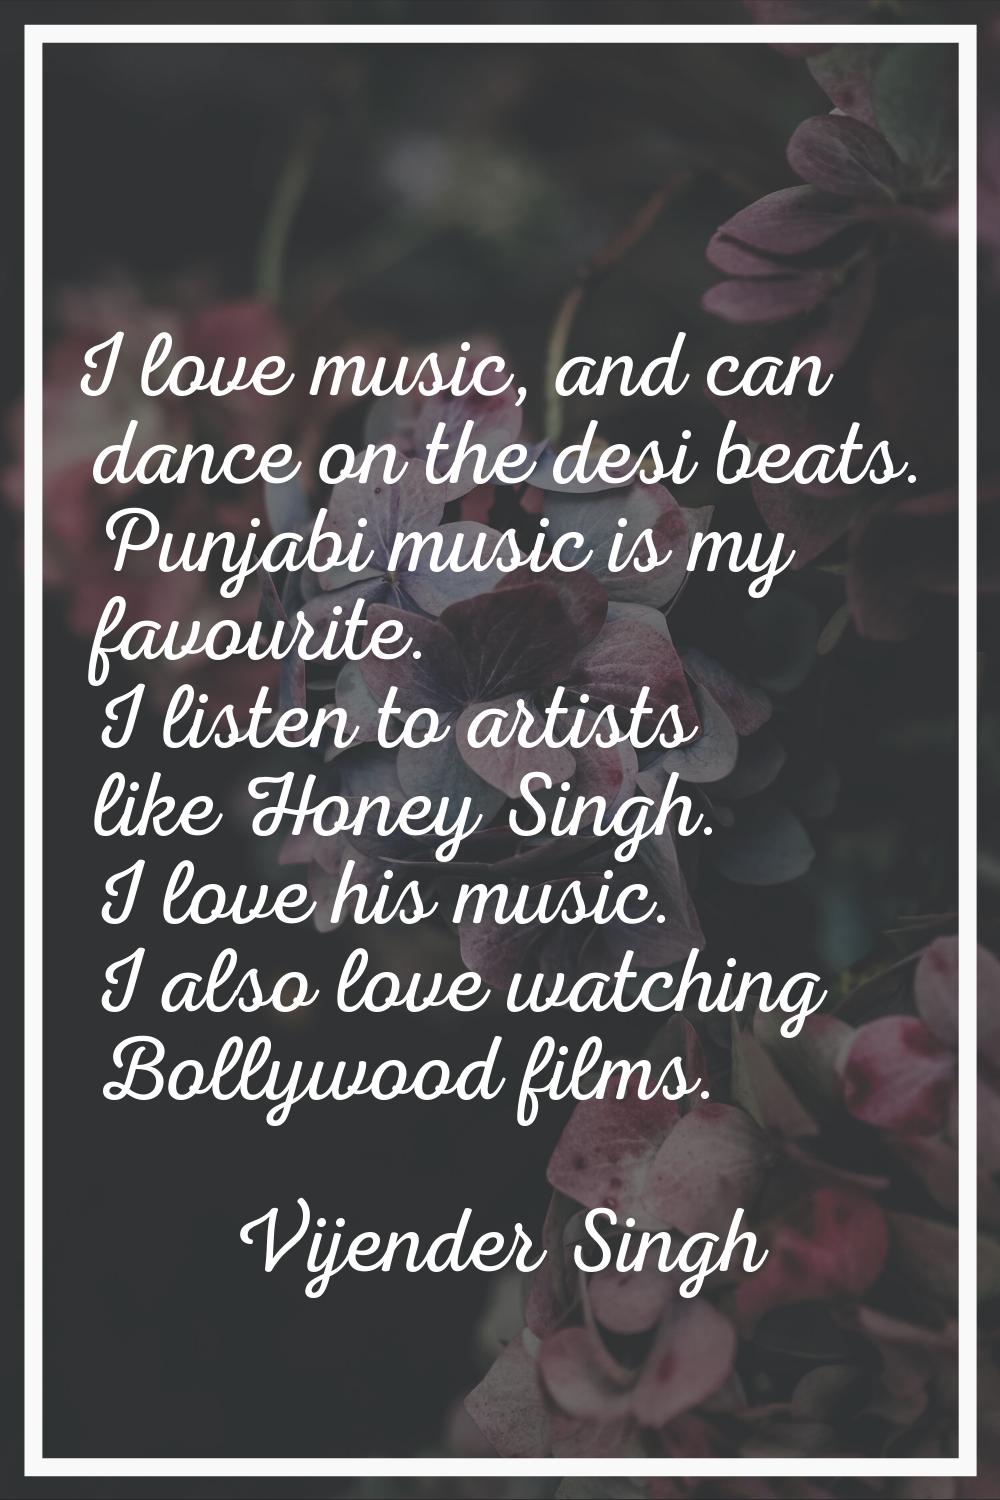 I love music, and can dance on the desi beats. Punjabi music is my favourite. I listen to artists l